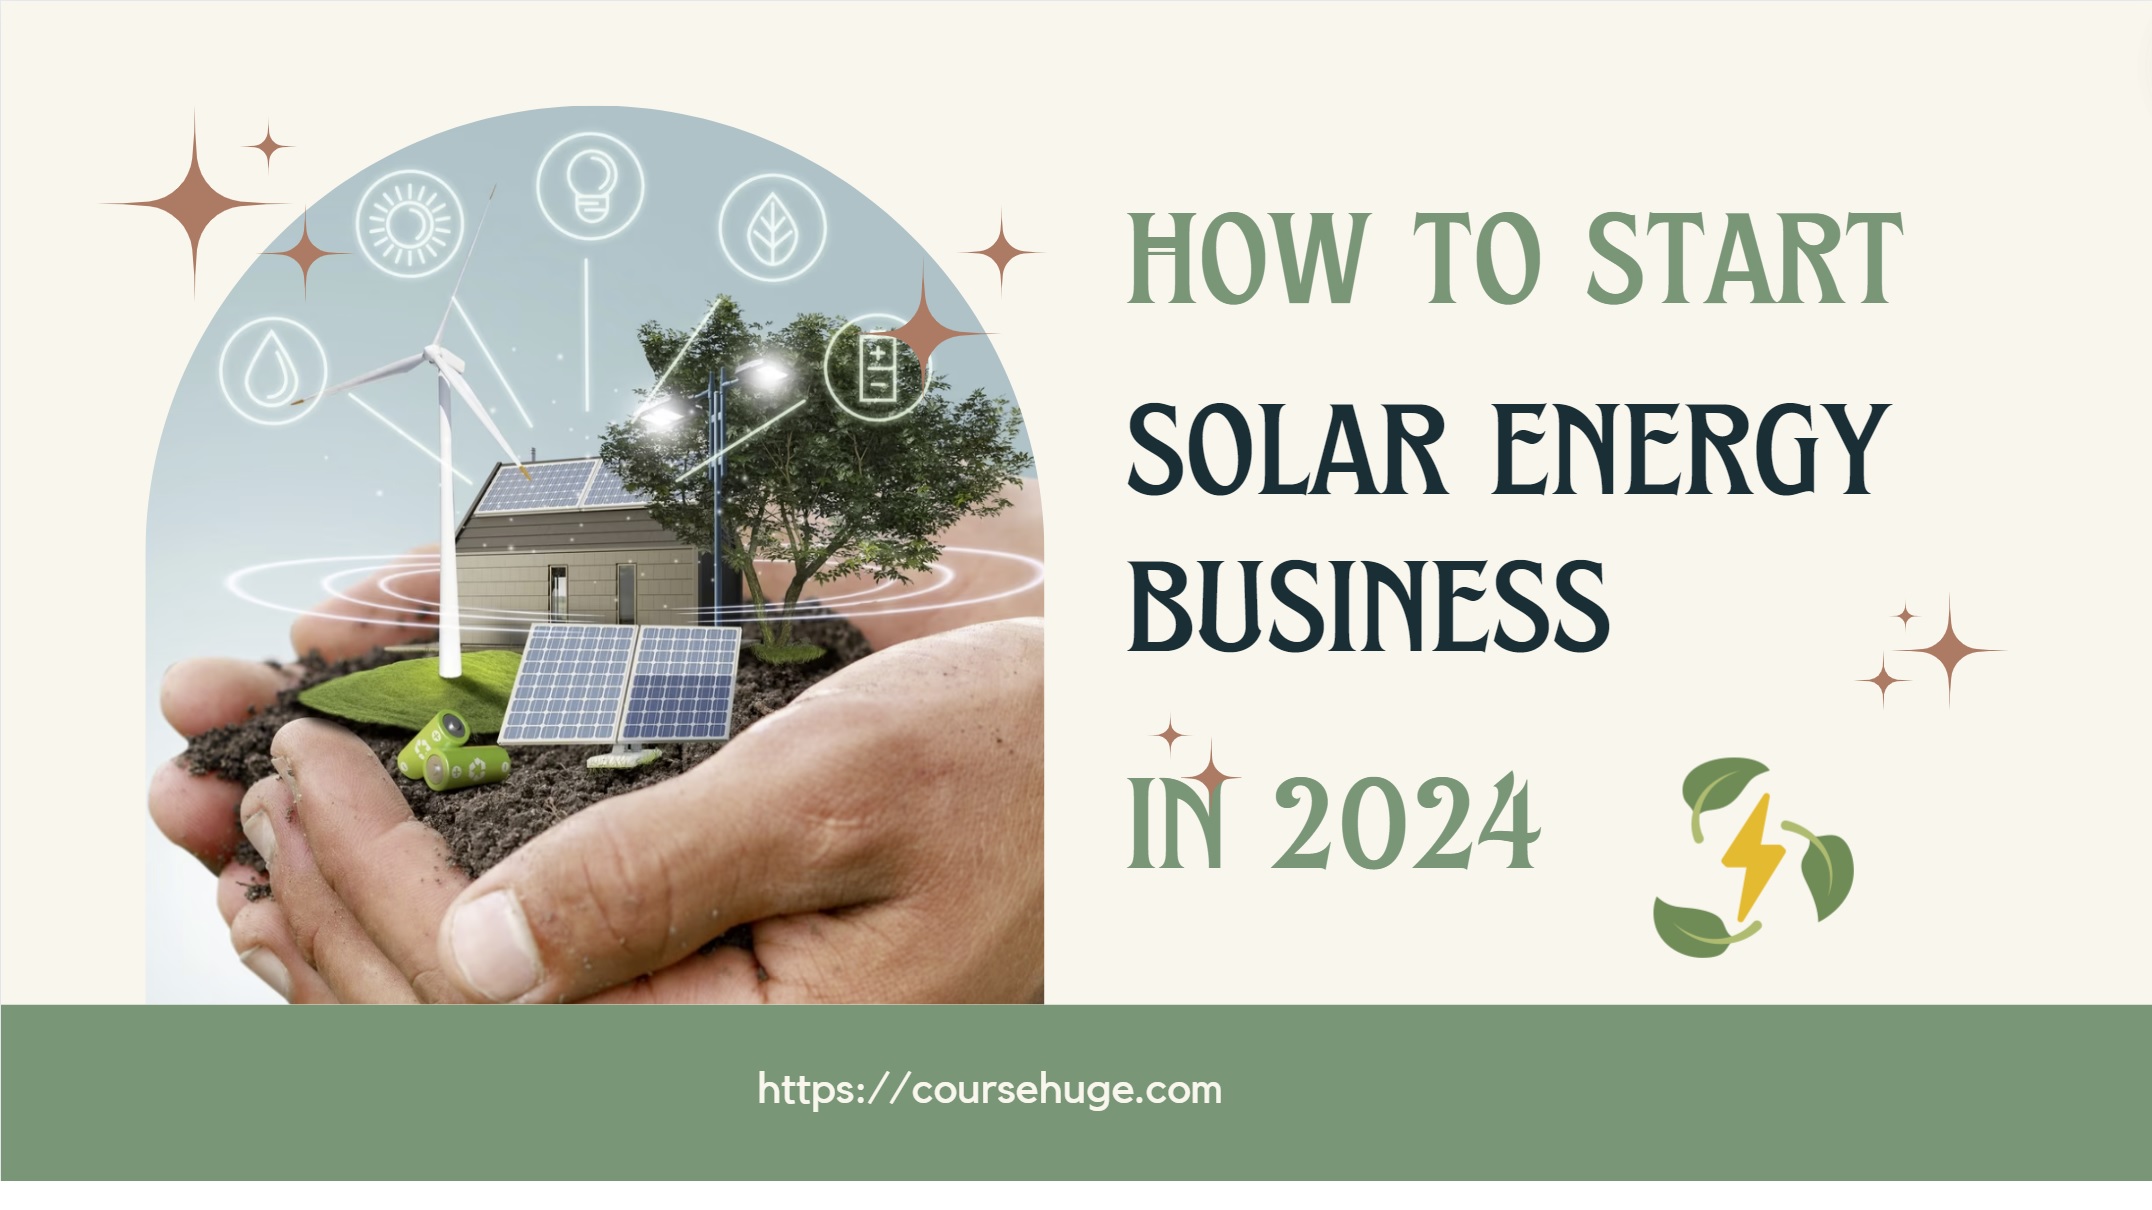 How To Start A Solar Energy Business In 2024: Simple Guide